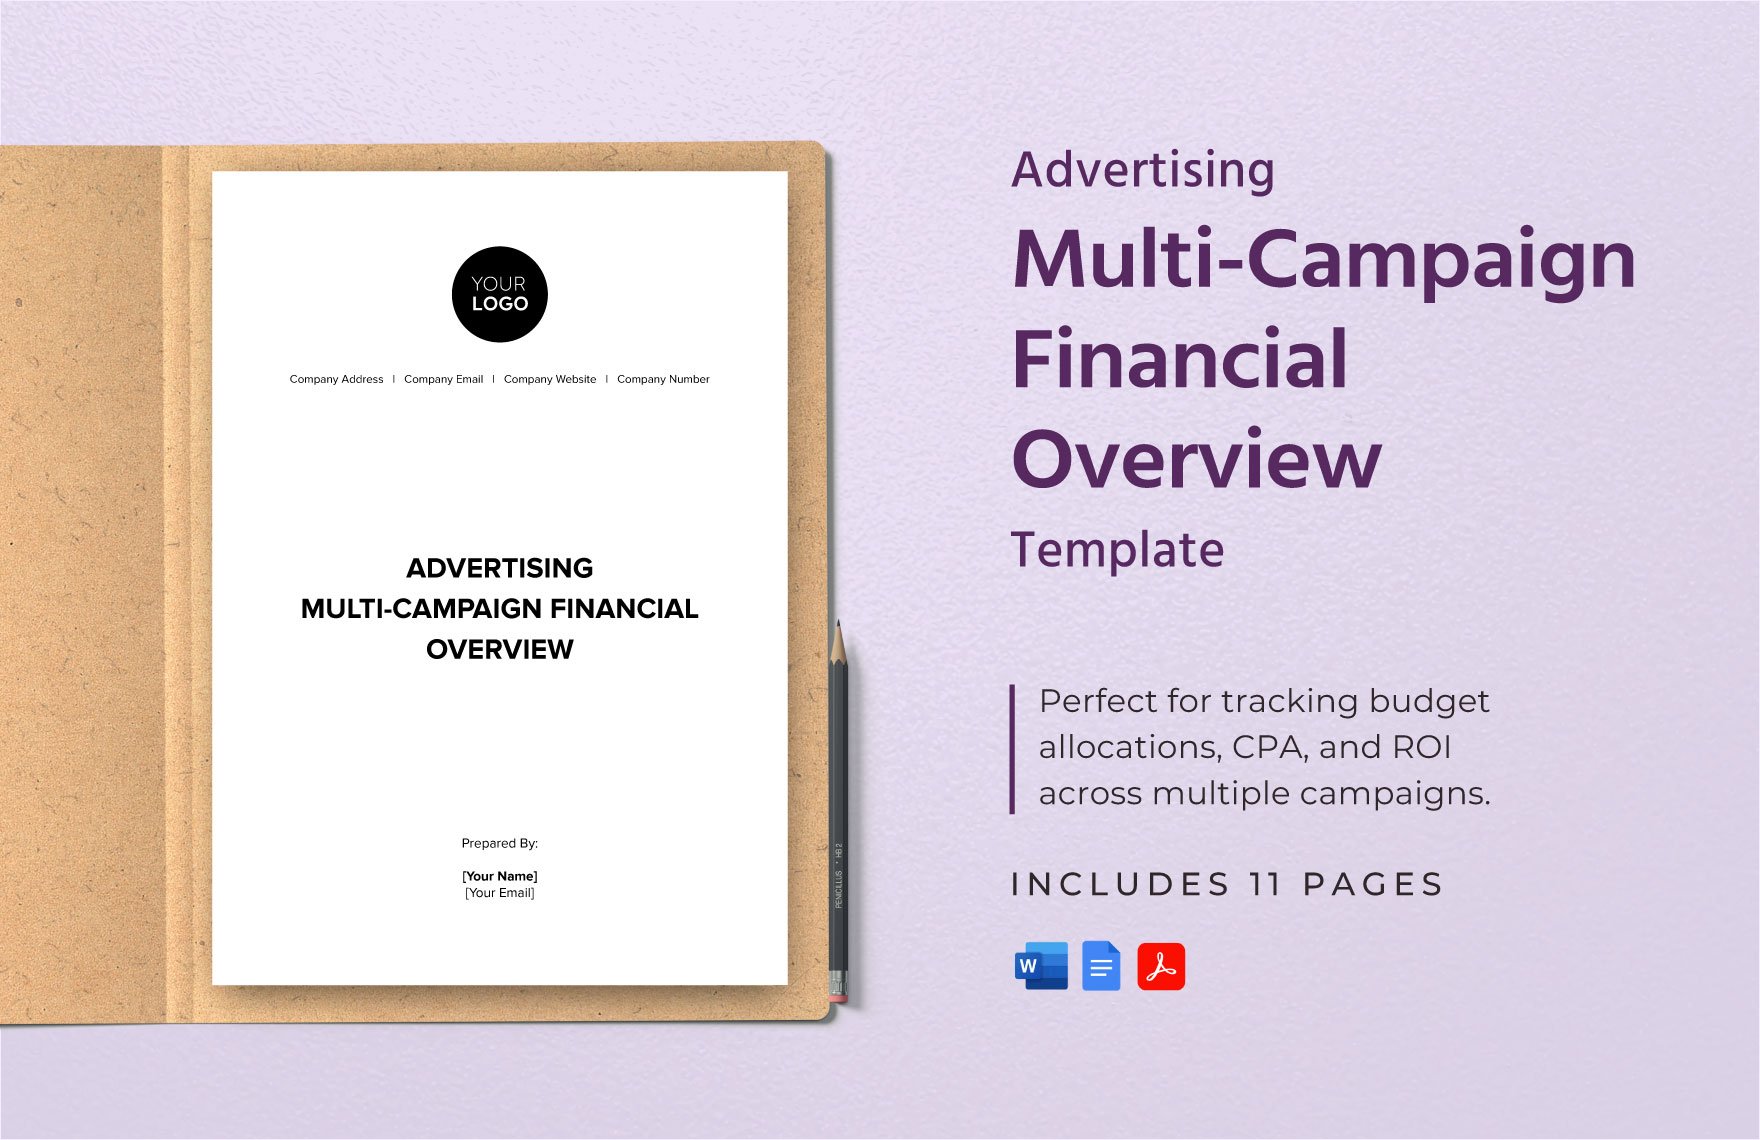 Advertising Multi-Campaign Financial Overview Template in Word, Google Docs, PDF